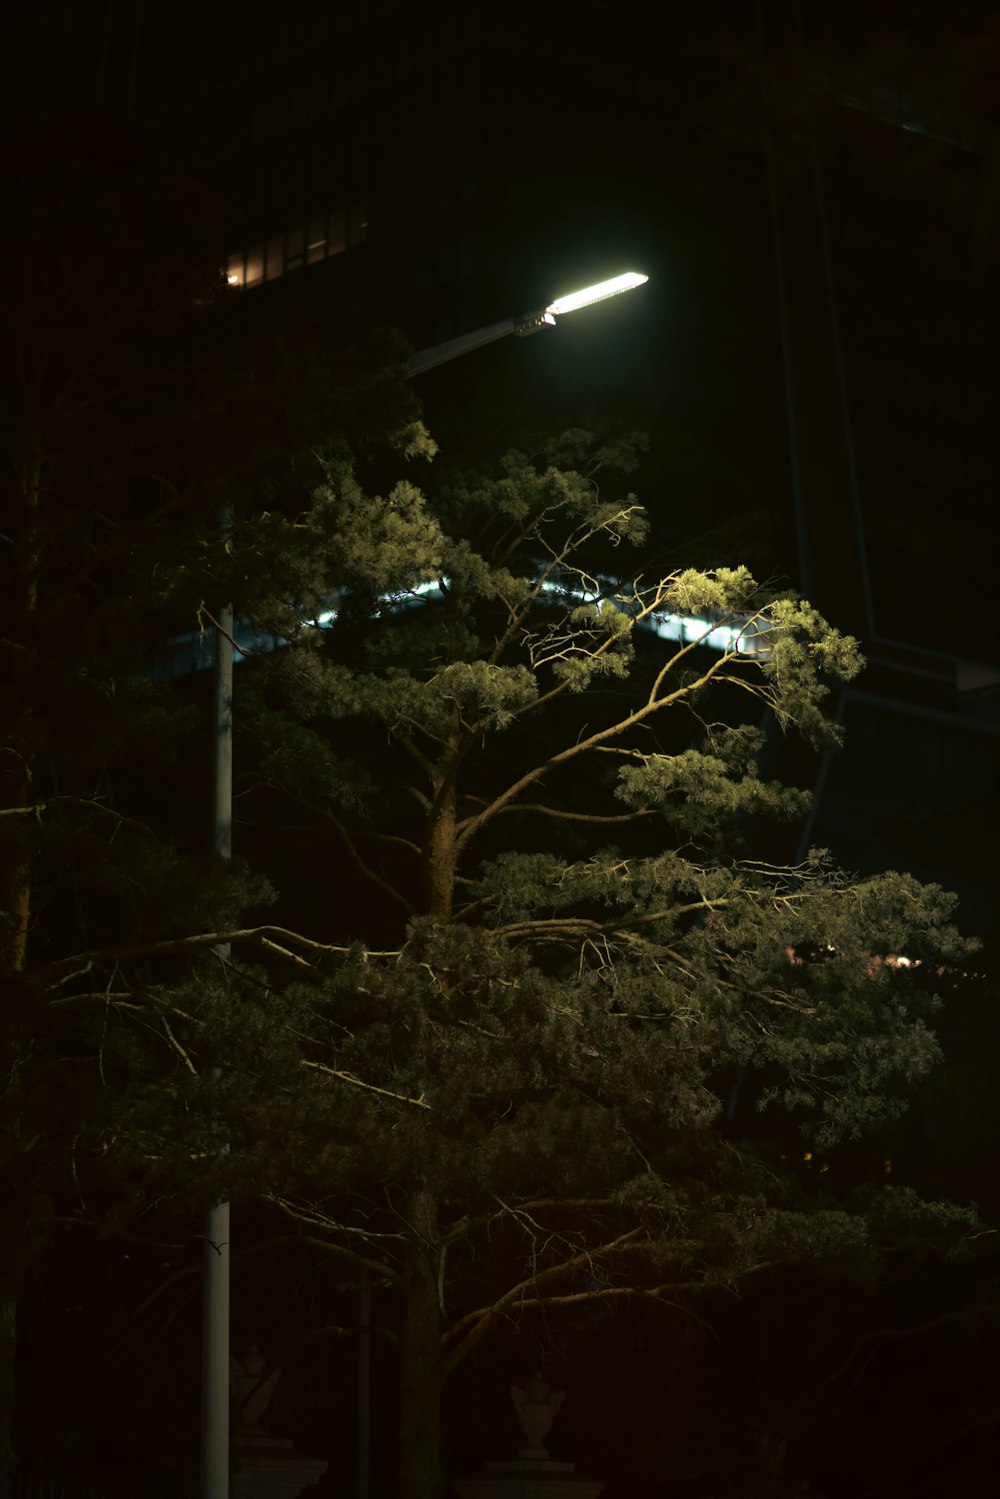 a street light shines above a tree at night